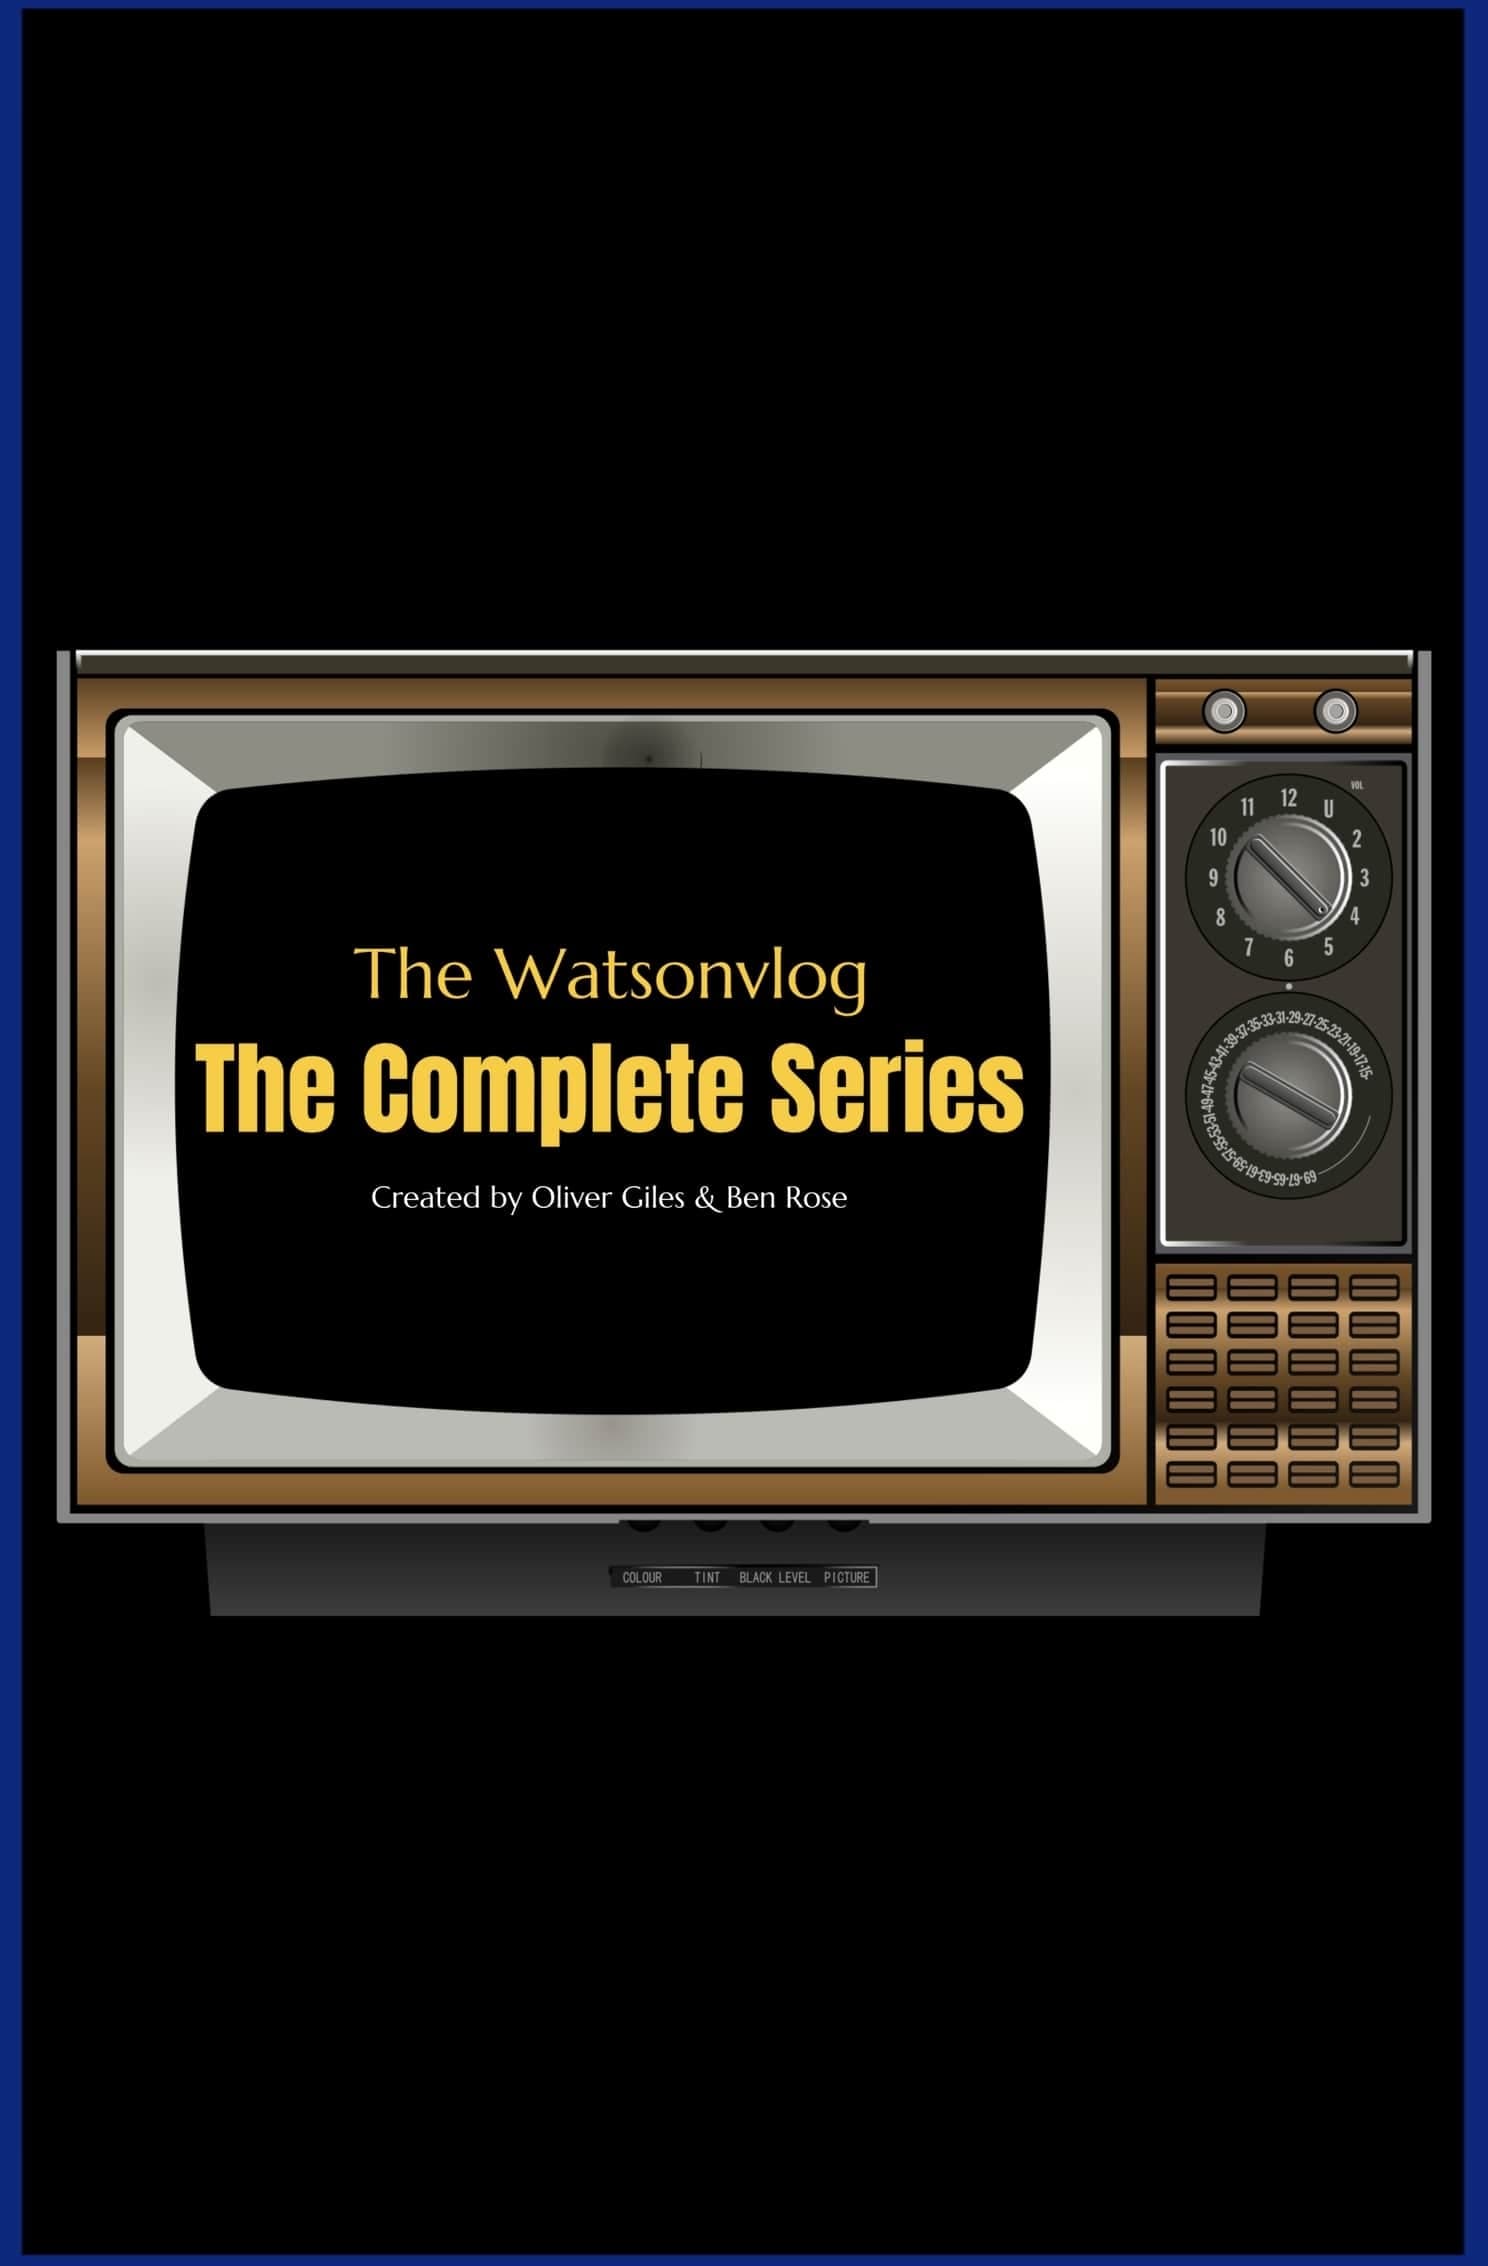 The Watsonvlog: The Complete Series